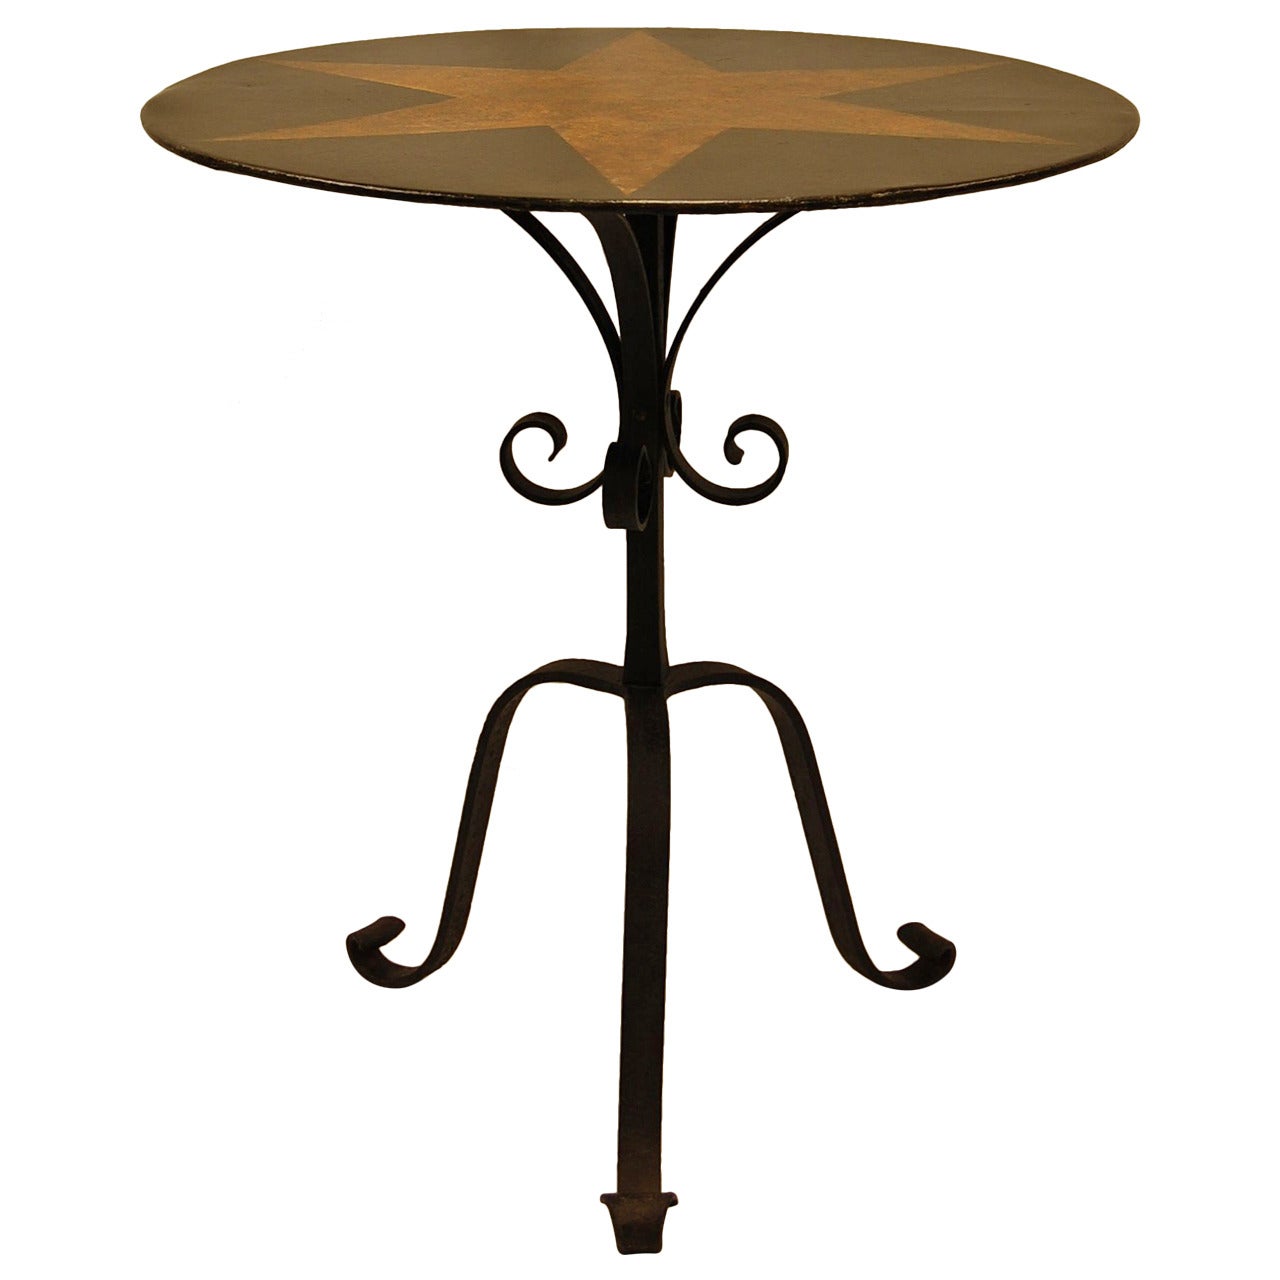 Tole Painted Circular Pedestal Table w/ Fancy Wrought Iron Tripod Base C. 1885 For Sale